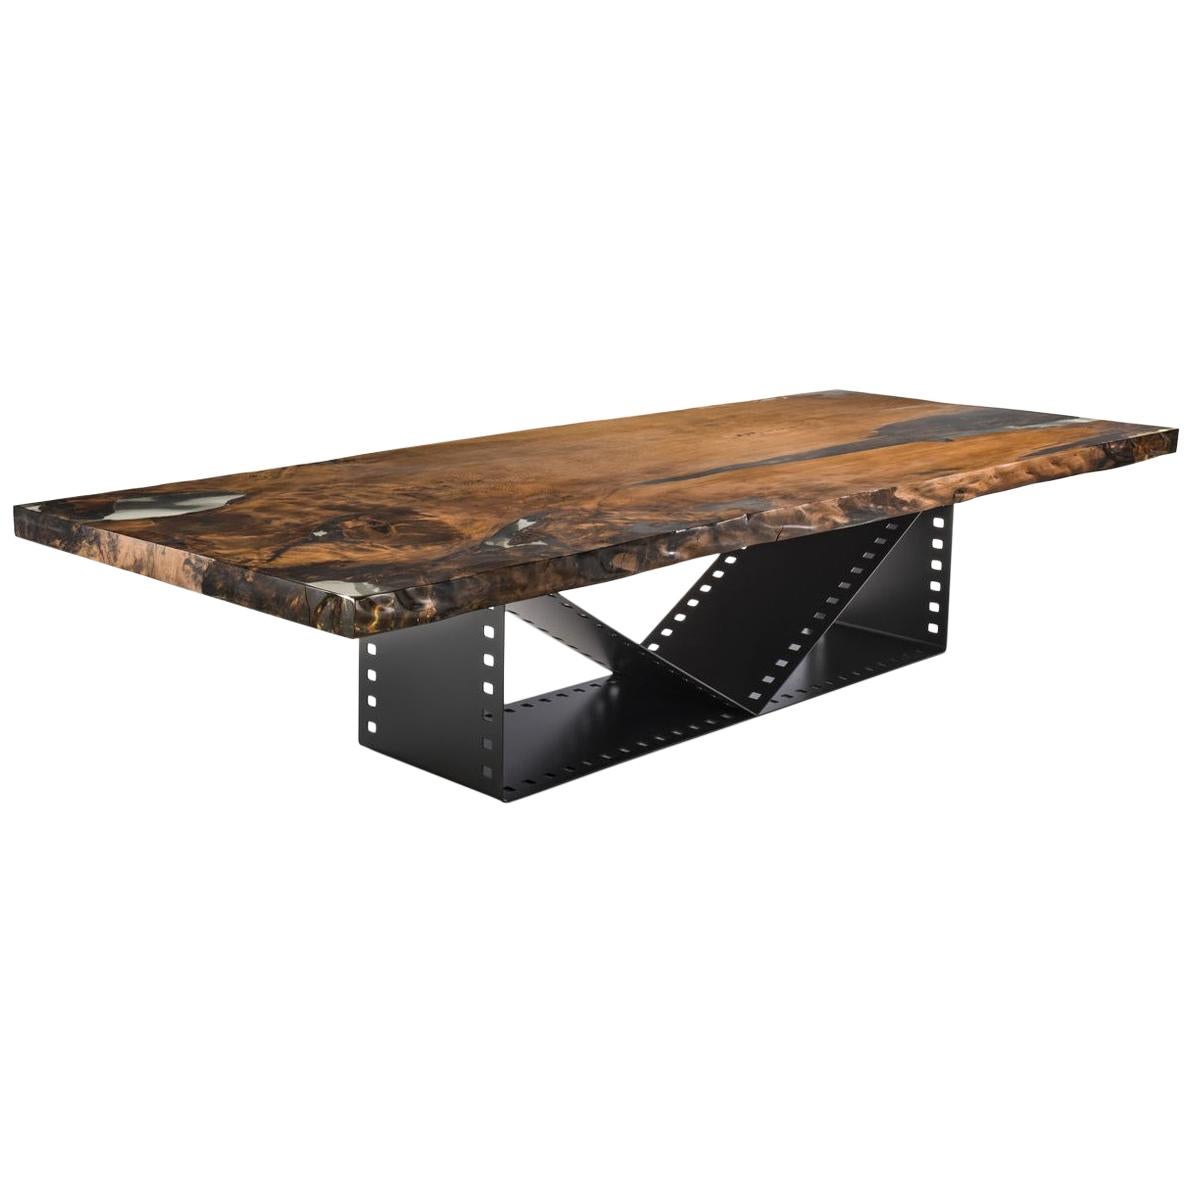 Film Roll Kauri Dining Table in Solid Kauri Wood